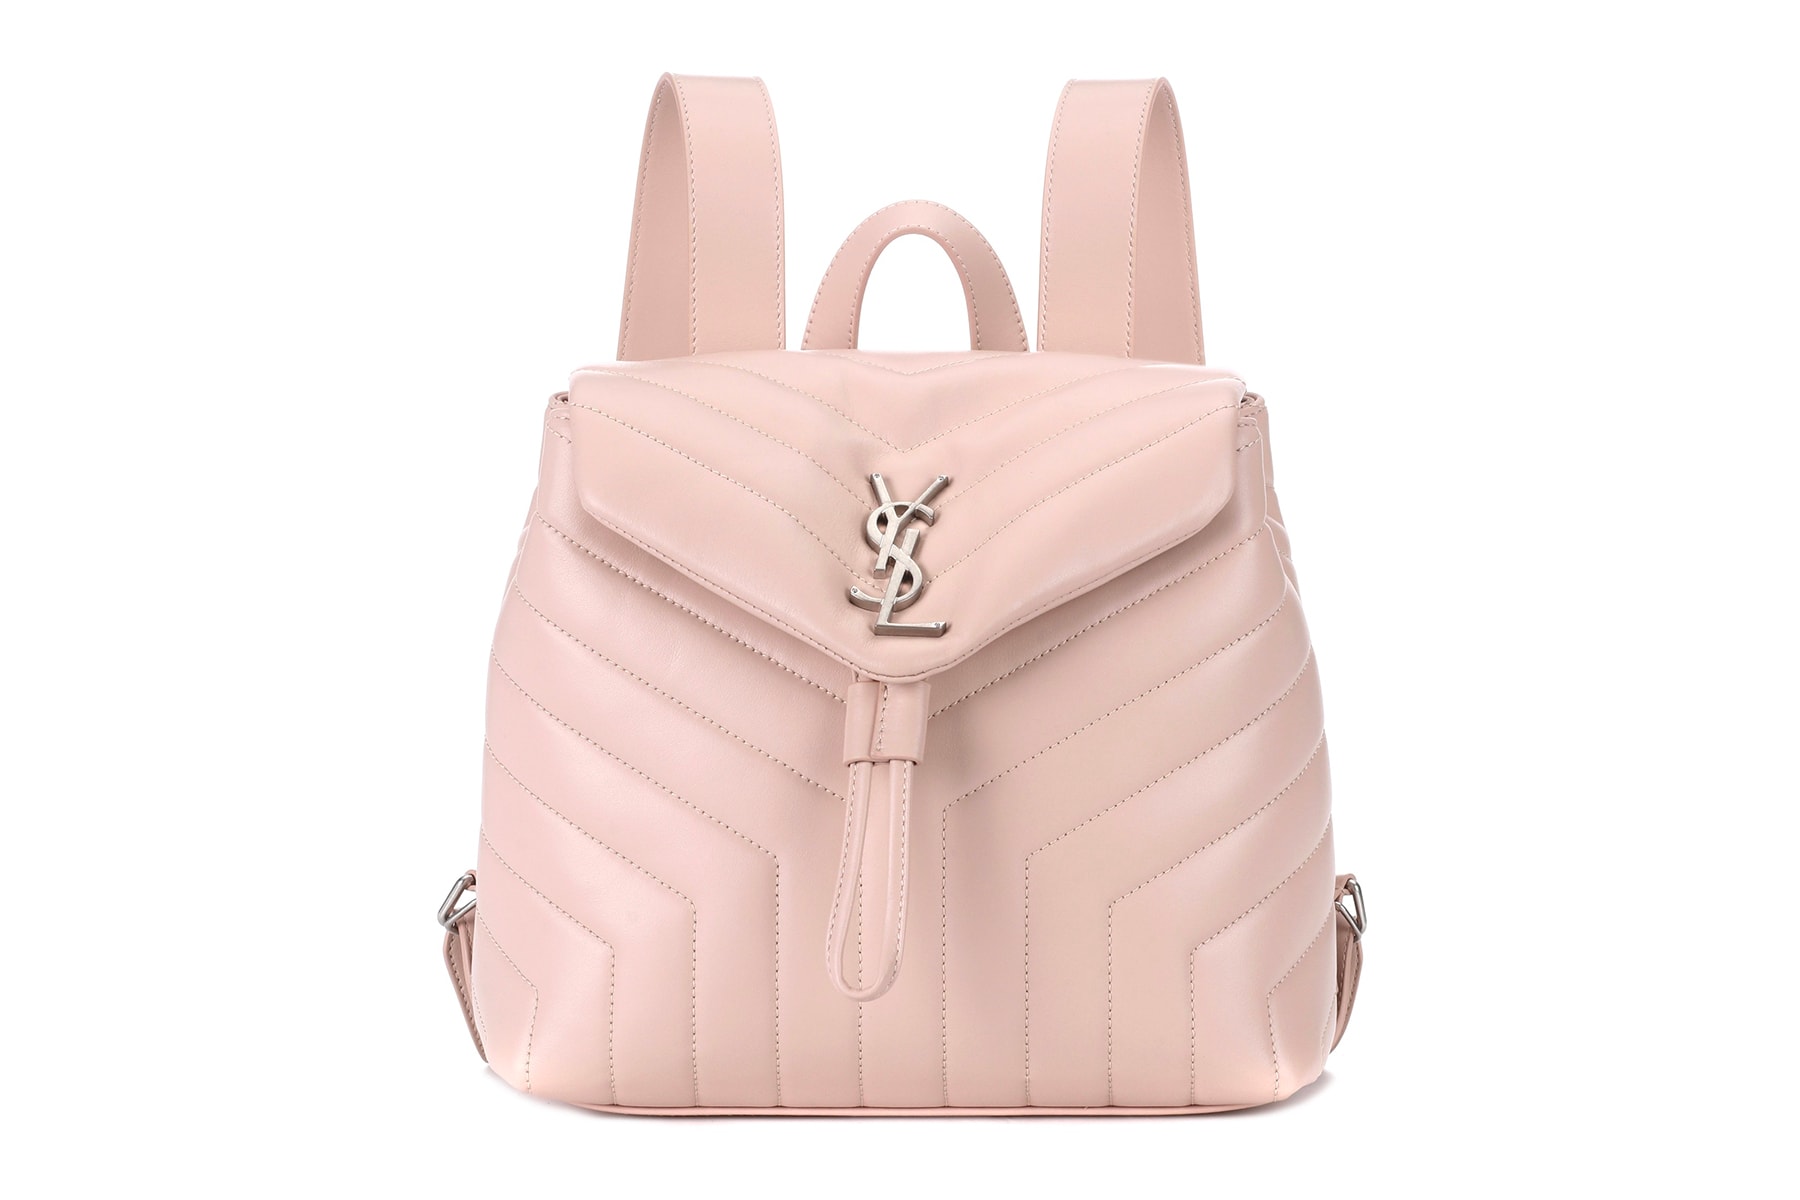 Saint Laurent Small Loulou Leather Backpack Millennial Pink mytheresa.com YSL Pastel